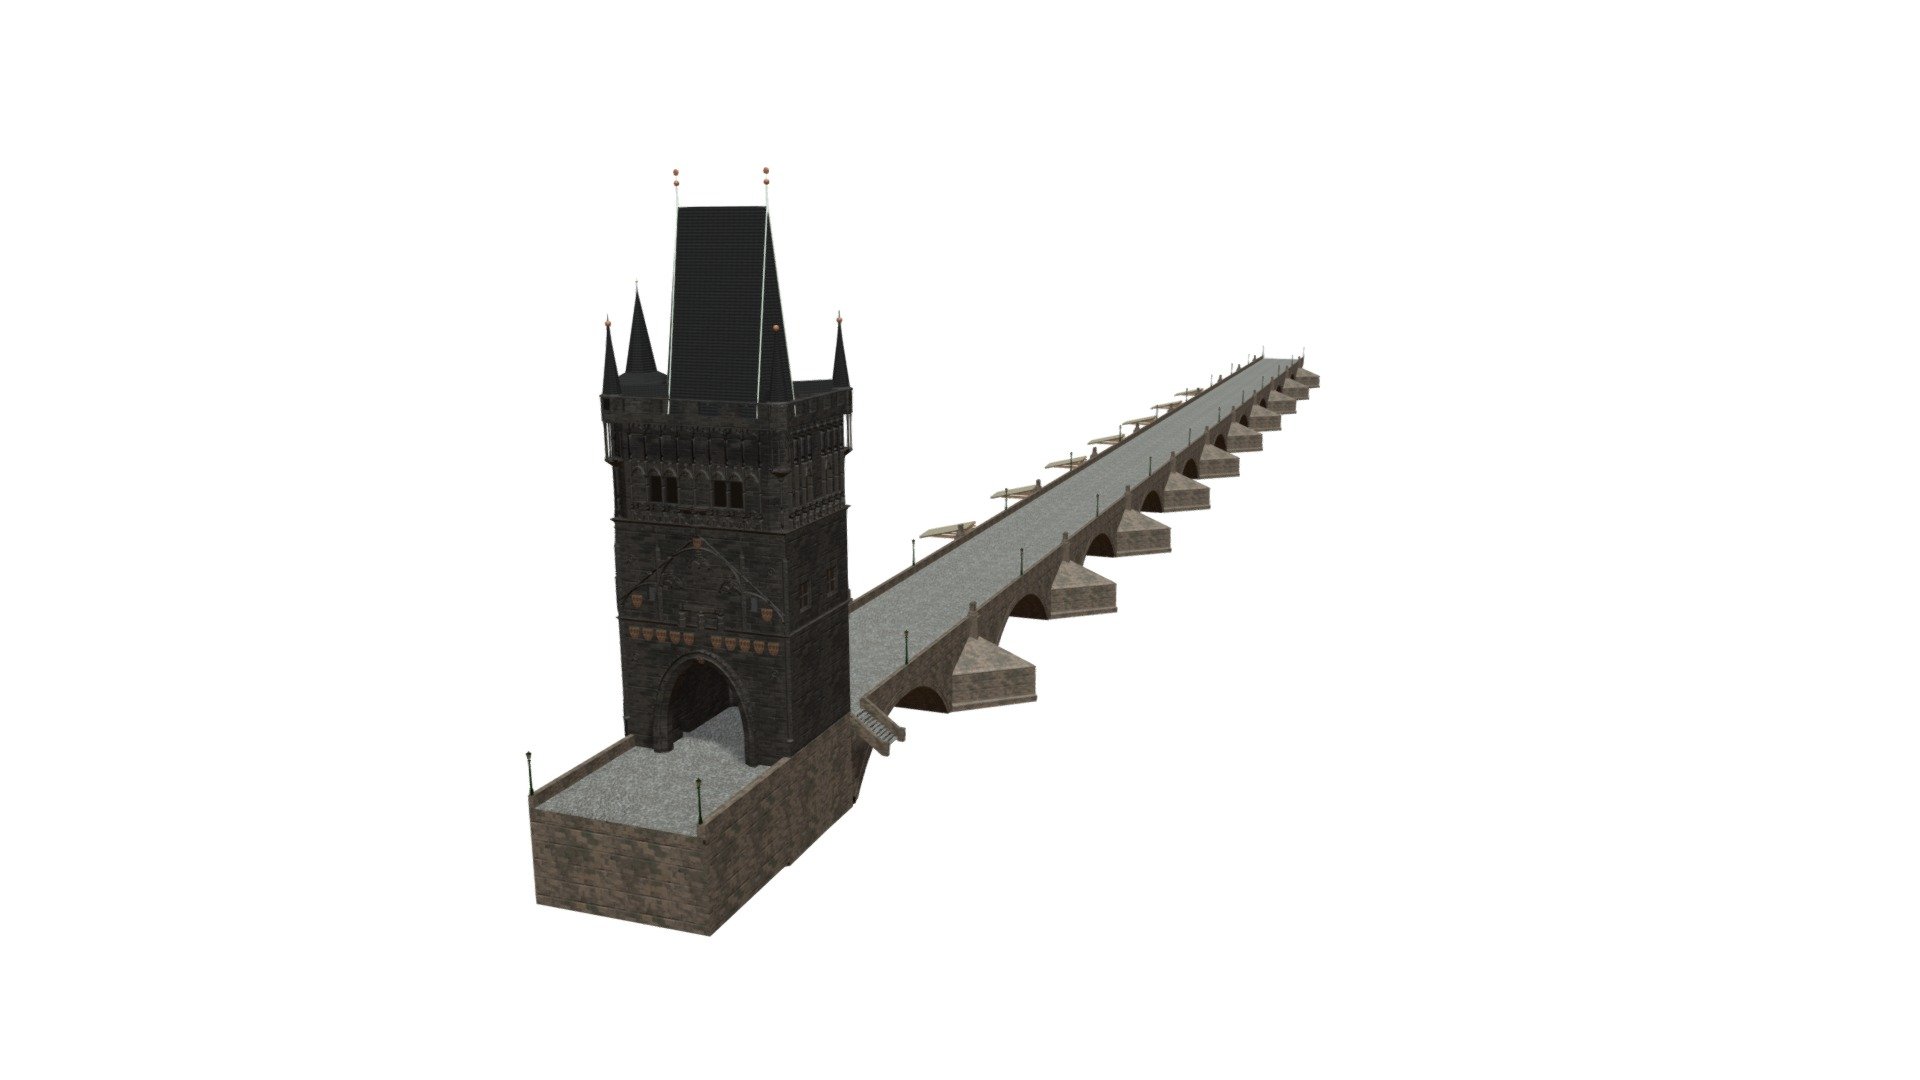 3D model of Charles Bridge with Tower in Prague, Czech Republic

Made in Blender

Unwrapped, good for close-up shots.

Medium-poly.

Charles Bridge is a medieval stone arch bridge that crosses the Vltava river in Prague, Czech Republic. Its construction started in 1357 under the auspices of King Charles IV, and finished in the early 15th century. The bridge replaced the old Judith Bridge built 1158–1172 that had been badly damaged by a flood in 1342. This new bridge was originally called Stone Bridge or Prague Bridge, but has been referred to as &lsquo;Charles Bridge' since 1870 3d model